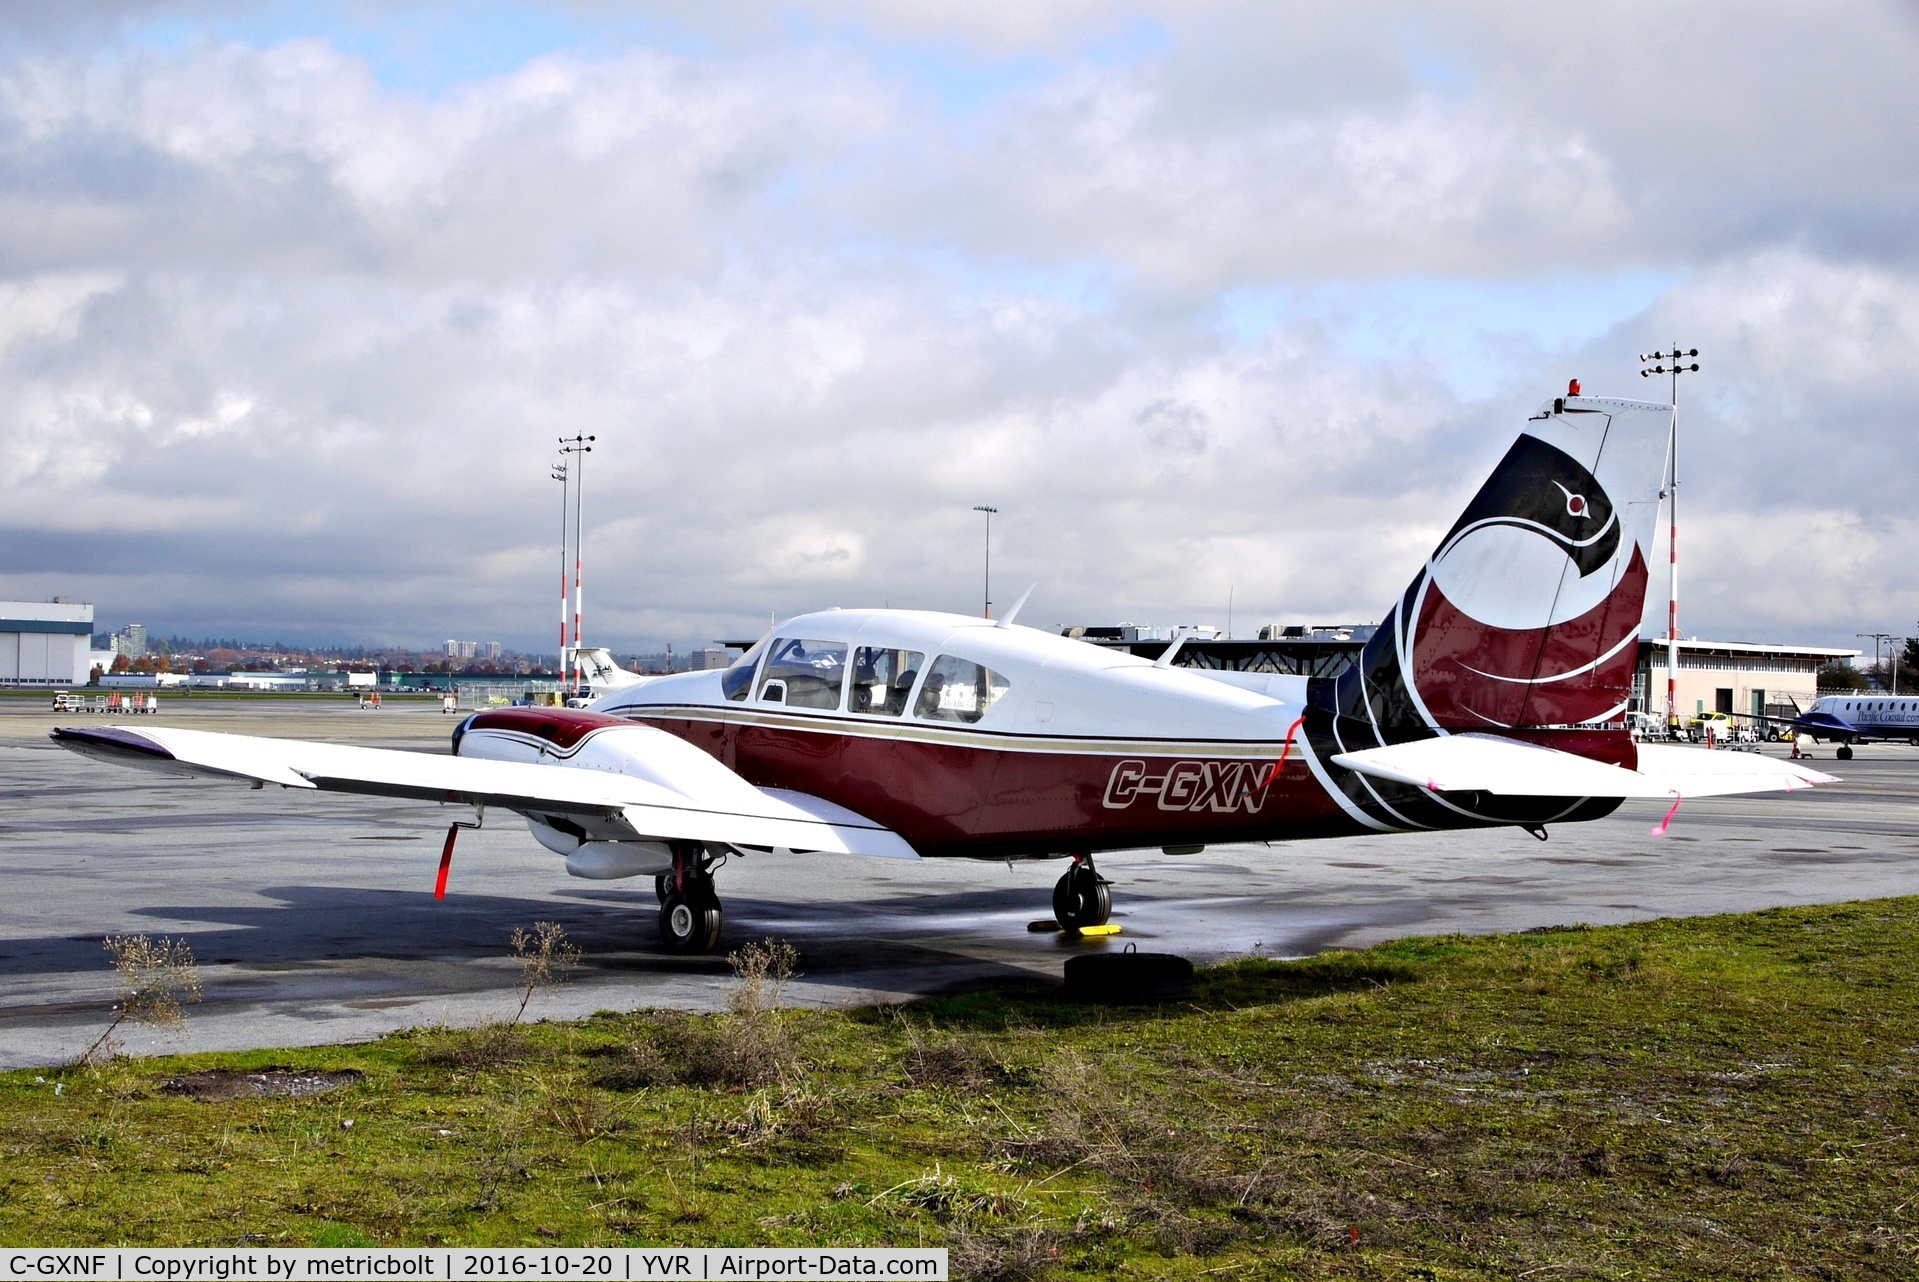 C-GXNF, 1972 Piper PA-23-250 Aztec C/N 27-4804, What happened to the 